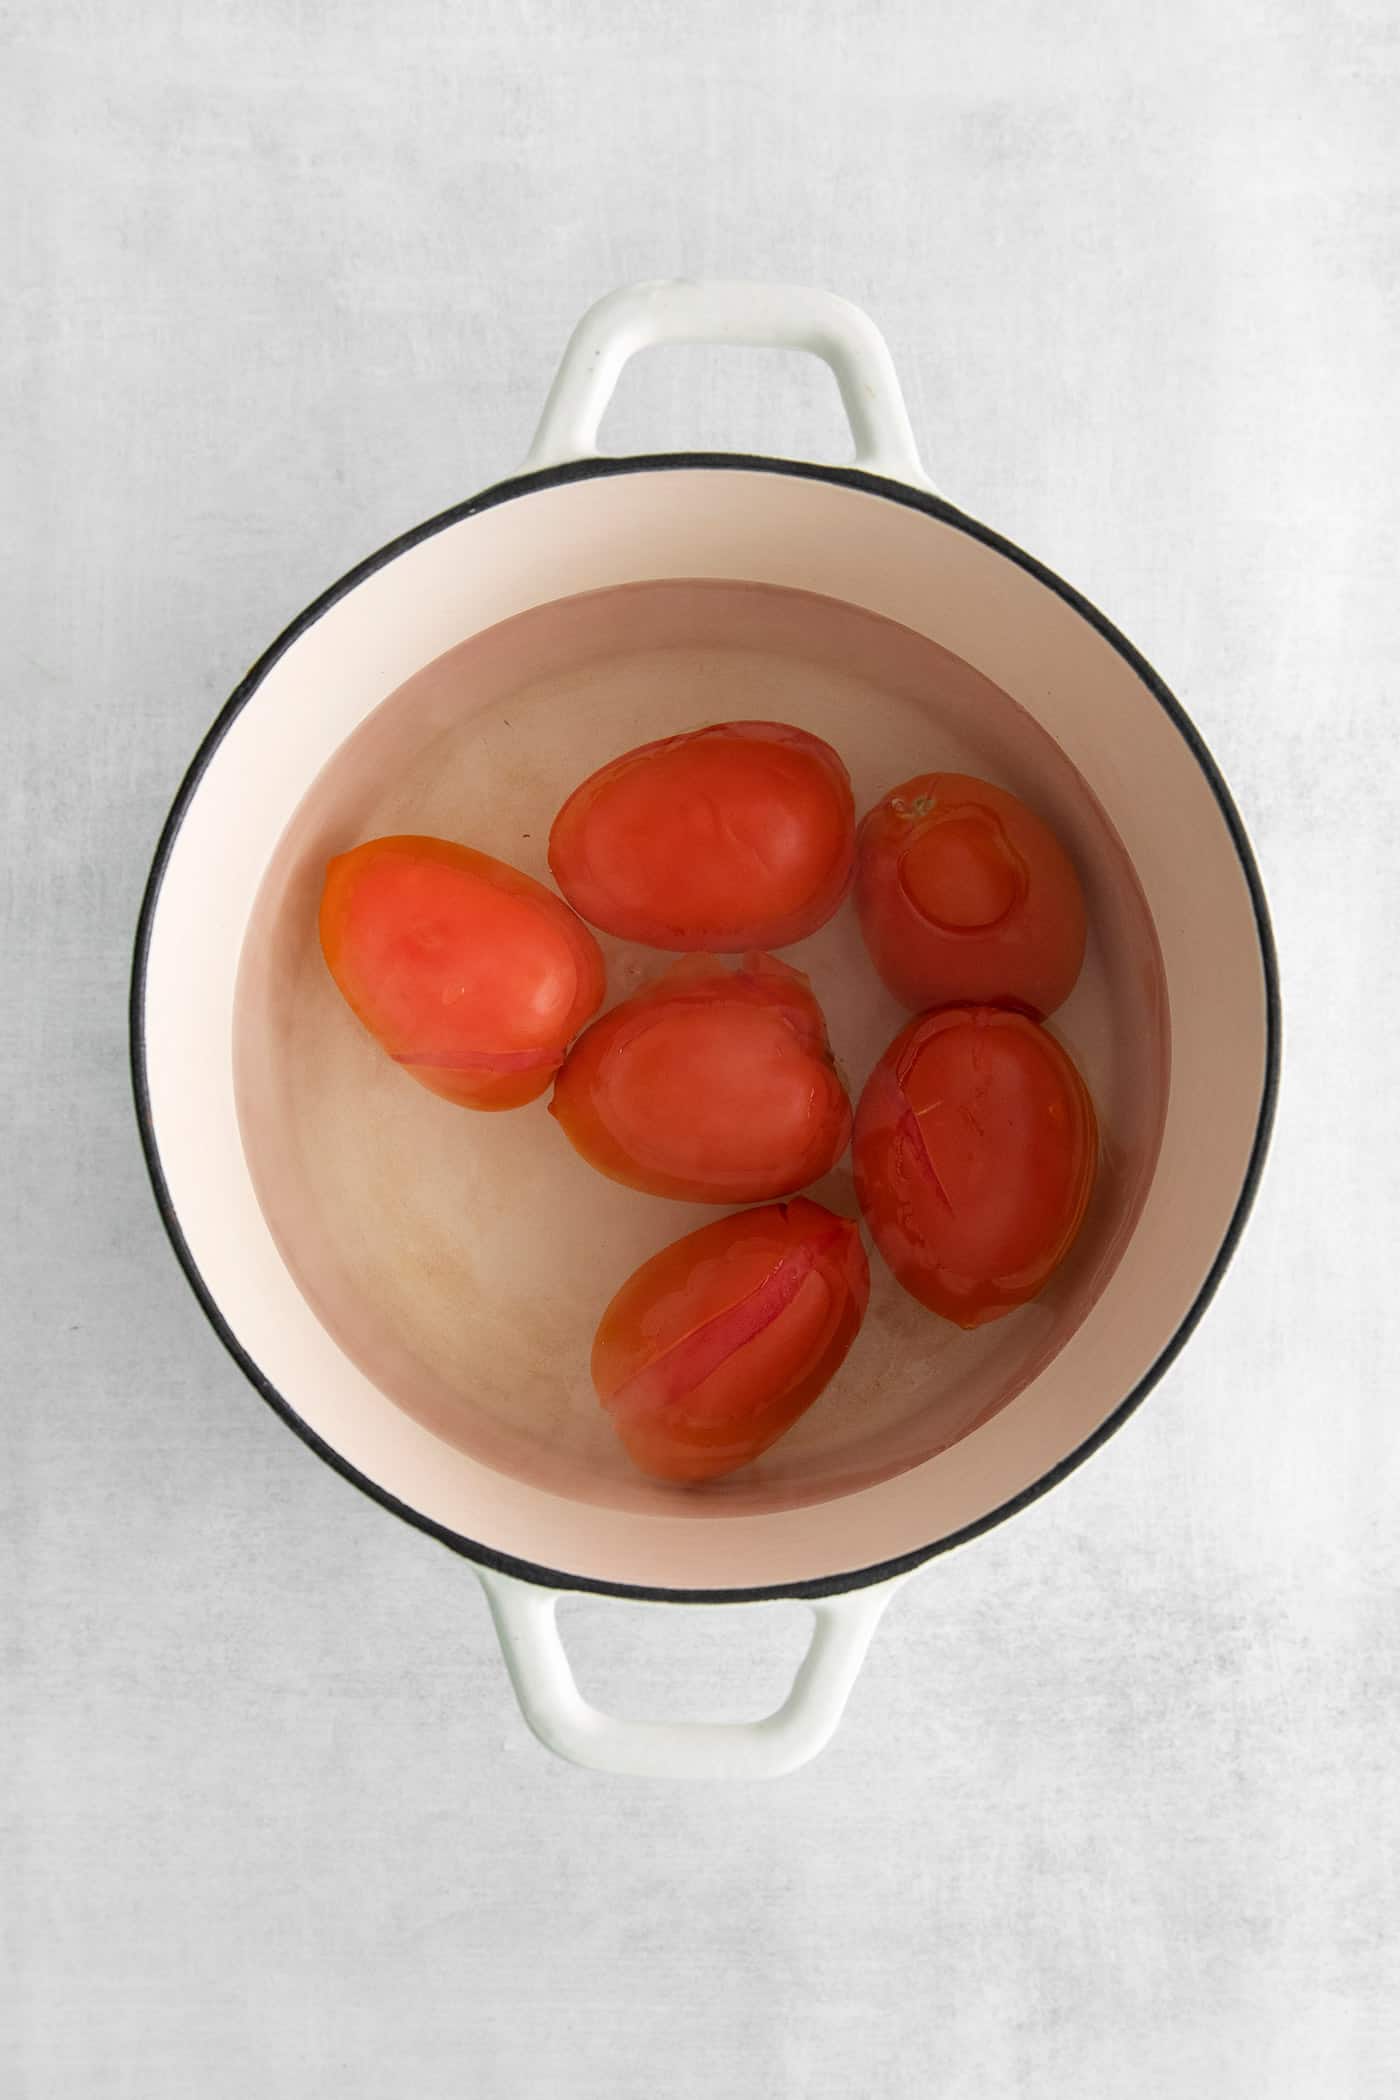 Roma tomatoes in a pot of water